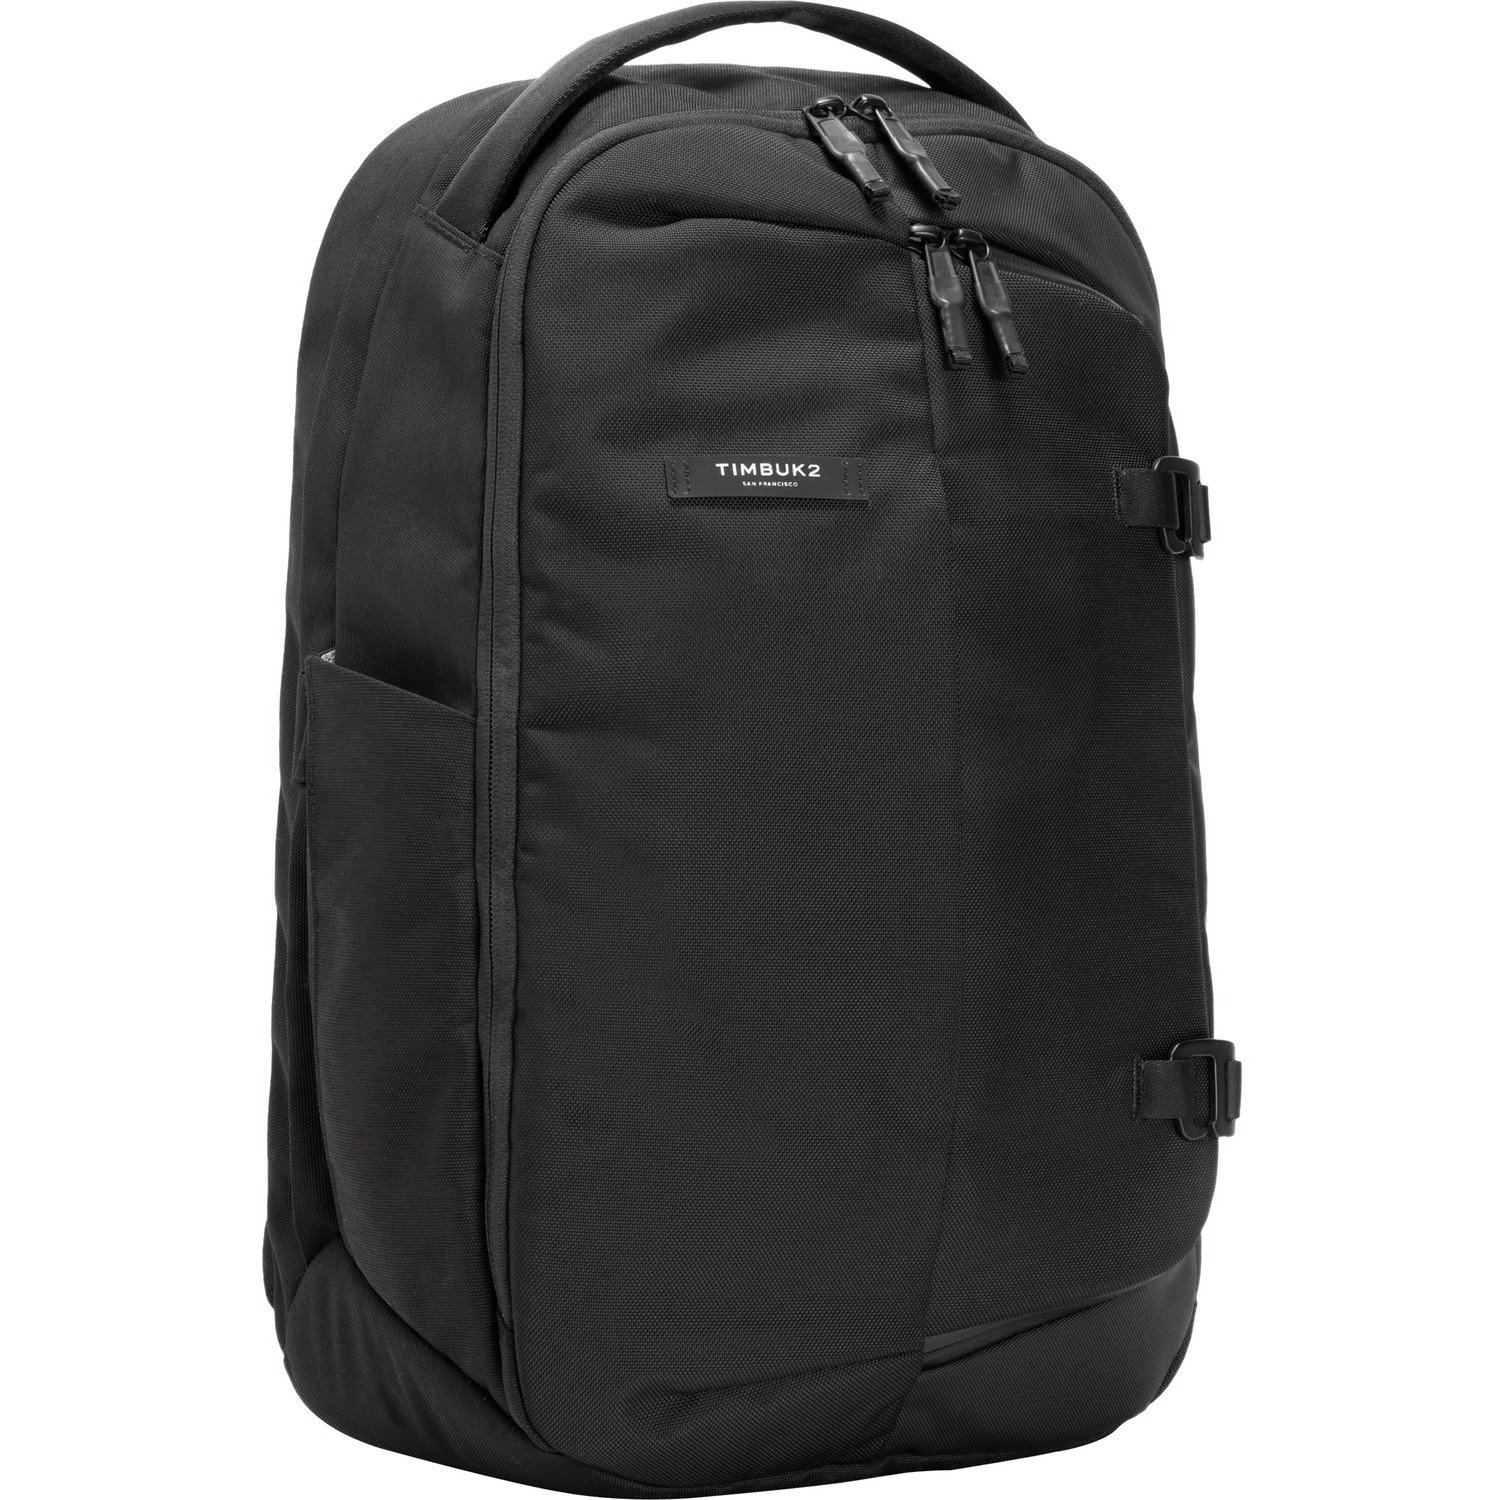 Timbuk2 Never Check Carrying Case (Backpack) for 9.7" to 15" iPad Notebook - Jet Black